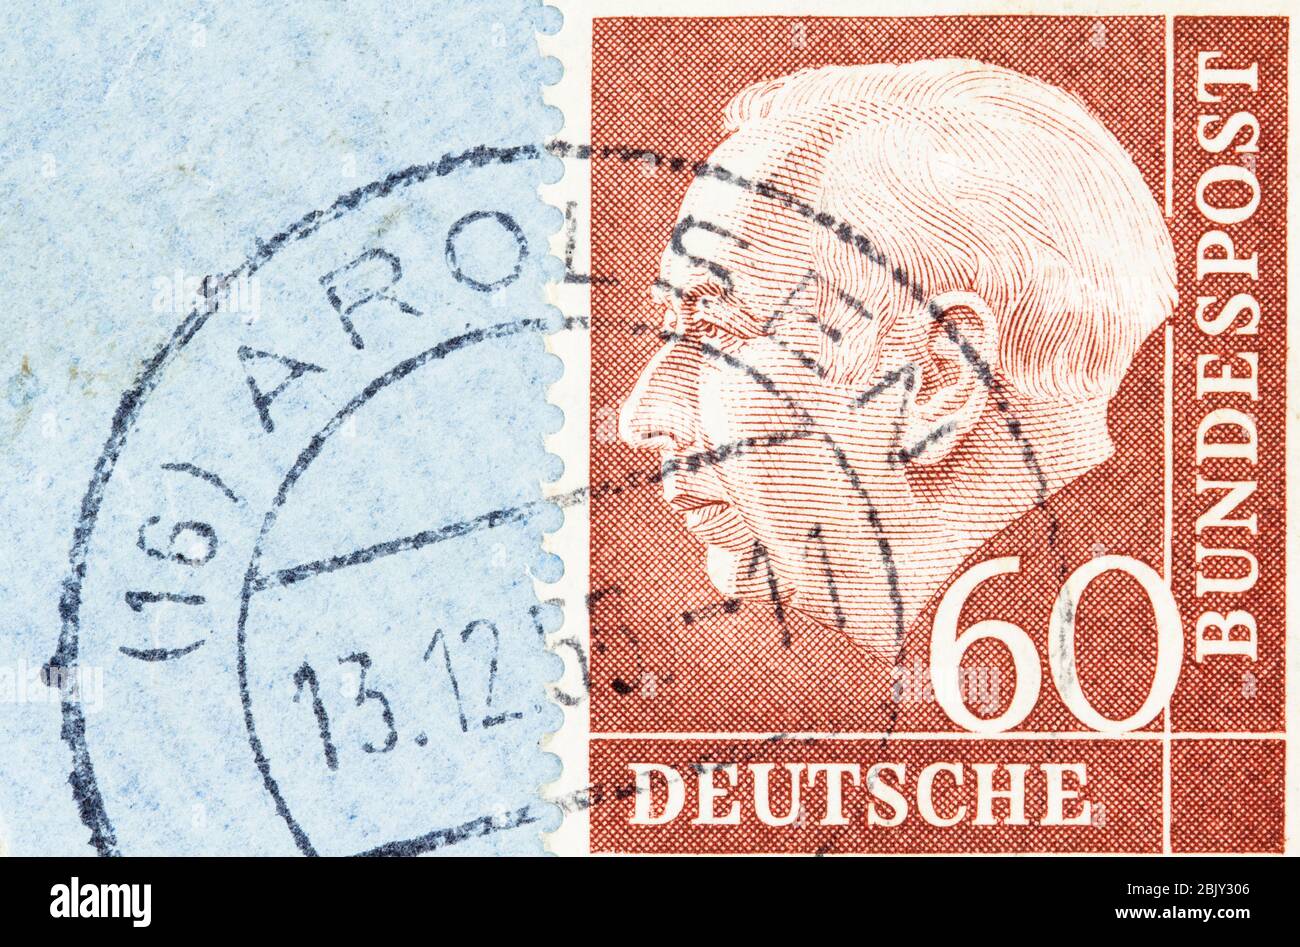 SEATTLE WASHINGTON - April 30, 2020: 1954 Germany stamp featuring portrait of former president Theordore Heuss in profile, on blue air mail envelope. Stock Photo